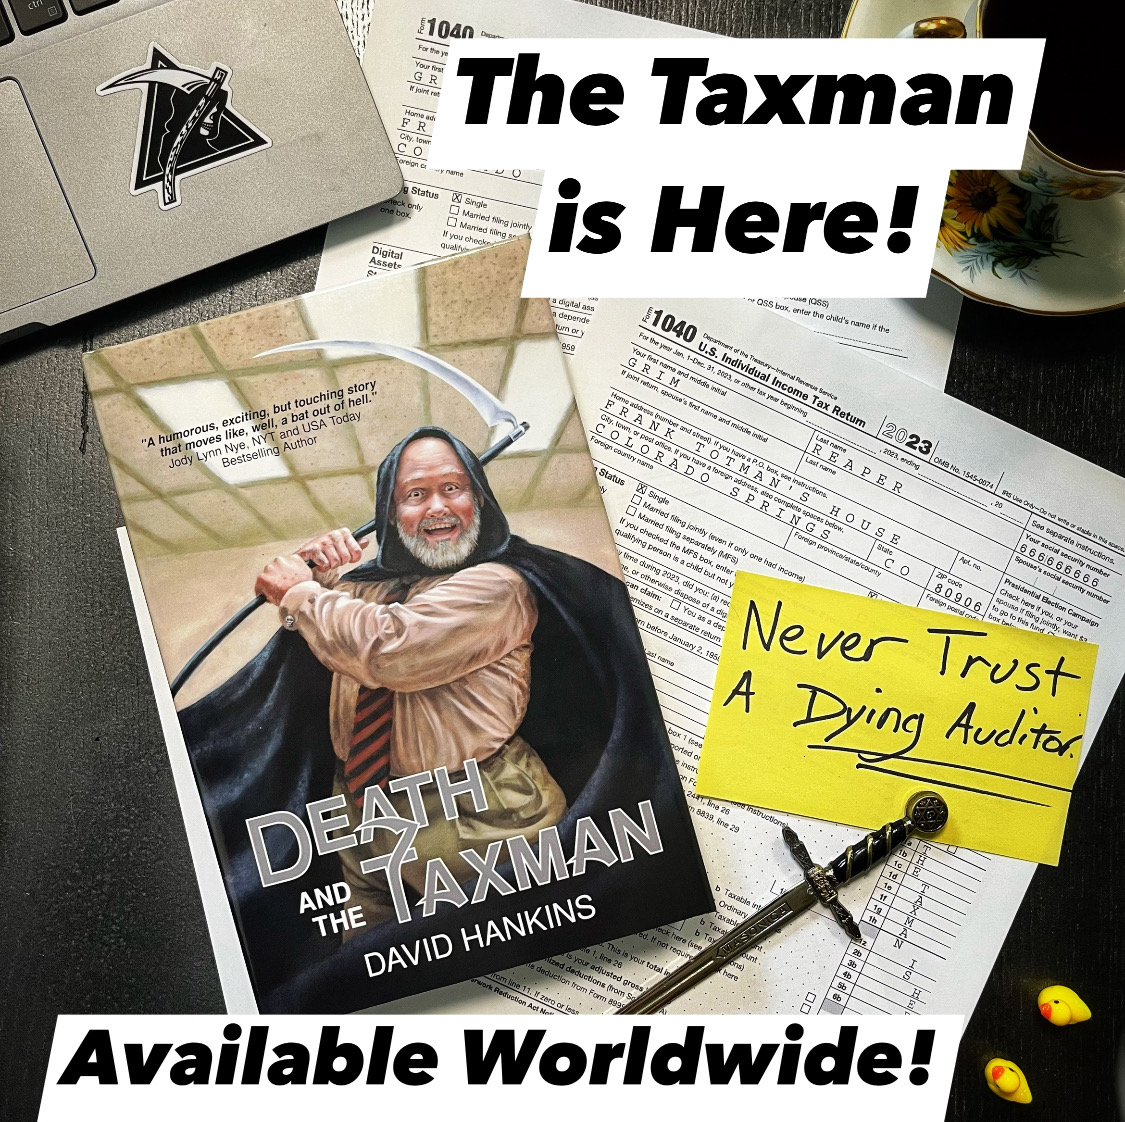 @WS_BOOKCLUB Thrilled to have entered #SPFBOX with my new release Death and the Taxman. Fingers crossed!

The Grim Reaper, trapped in an IRS agent's dying body, has to regain his powers before he dies and faces judgment for his original sin. 

books2read.com/deathandthetax…

#deathandthetaxman